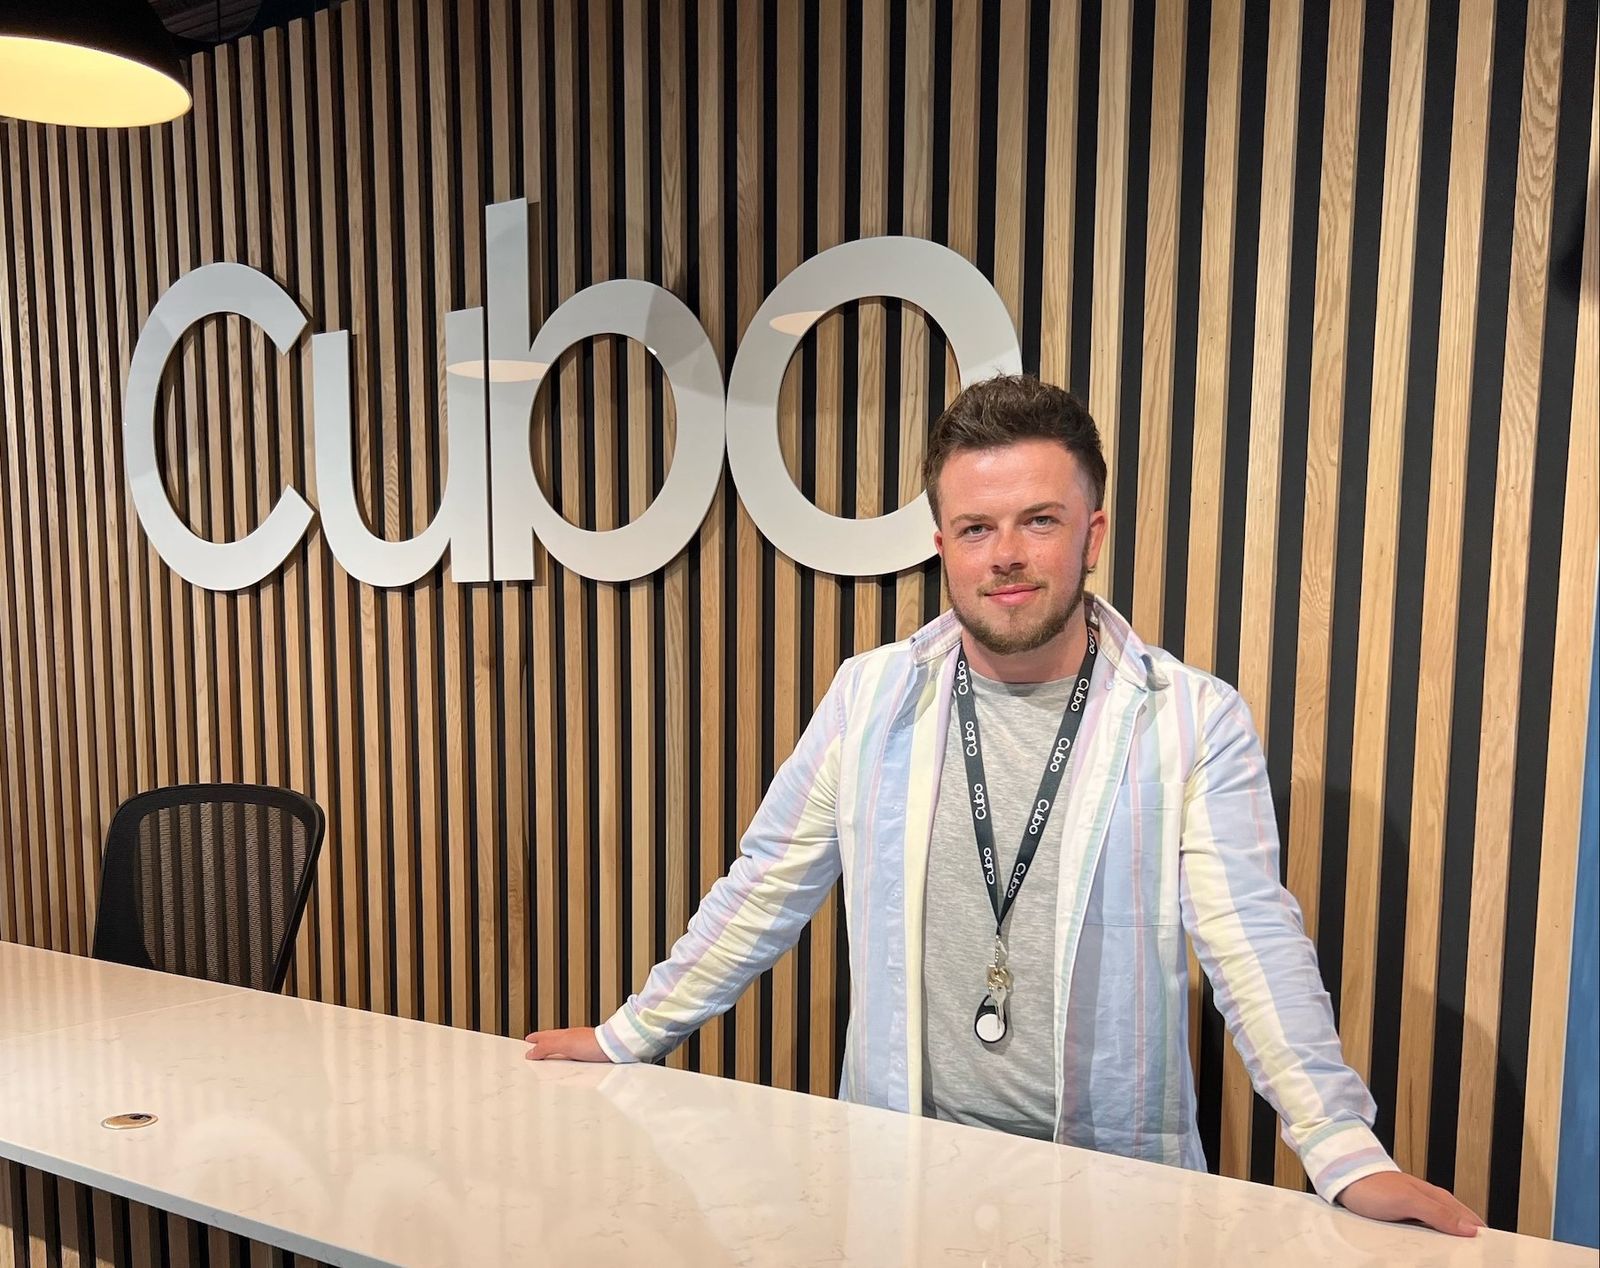 New centre manager for Cubo Leeds